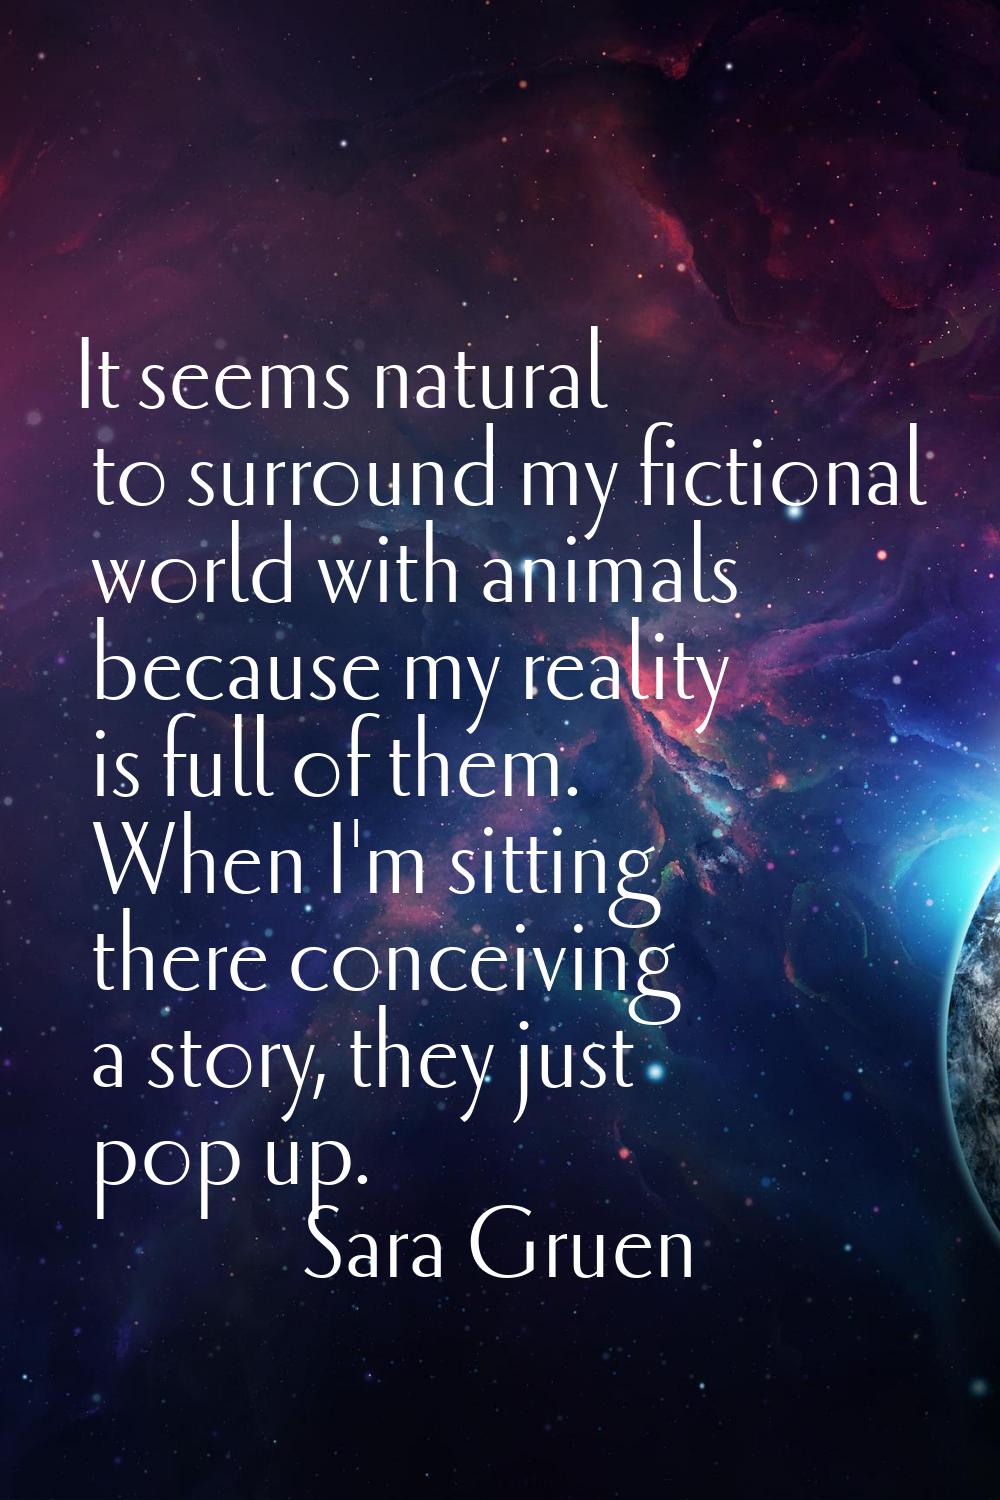 It seems natural to surround my fictional world with animals because my reality is full of them. Wh